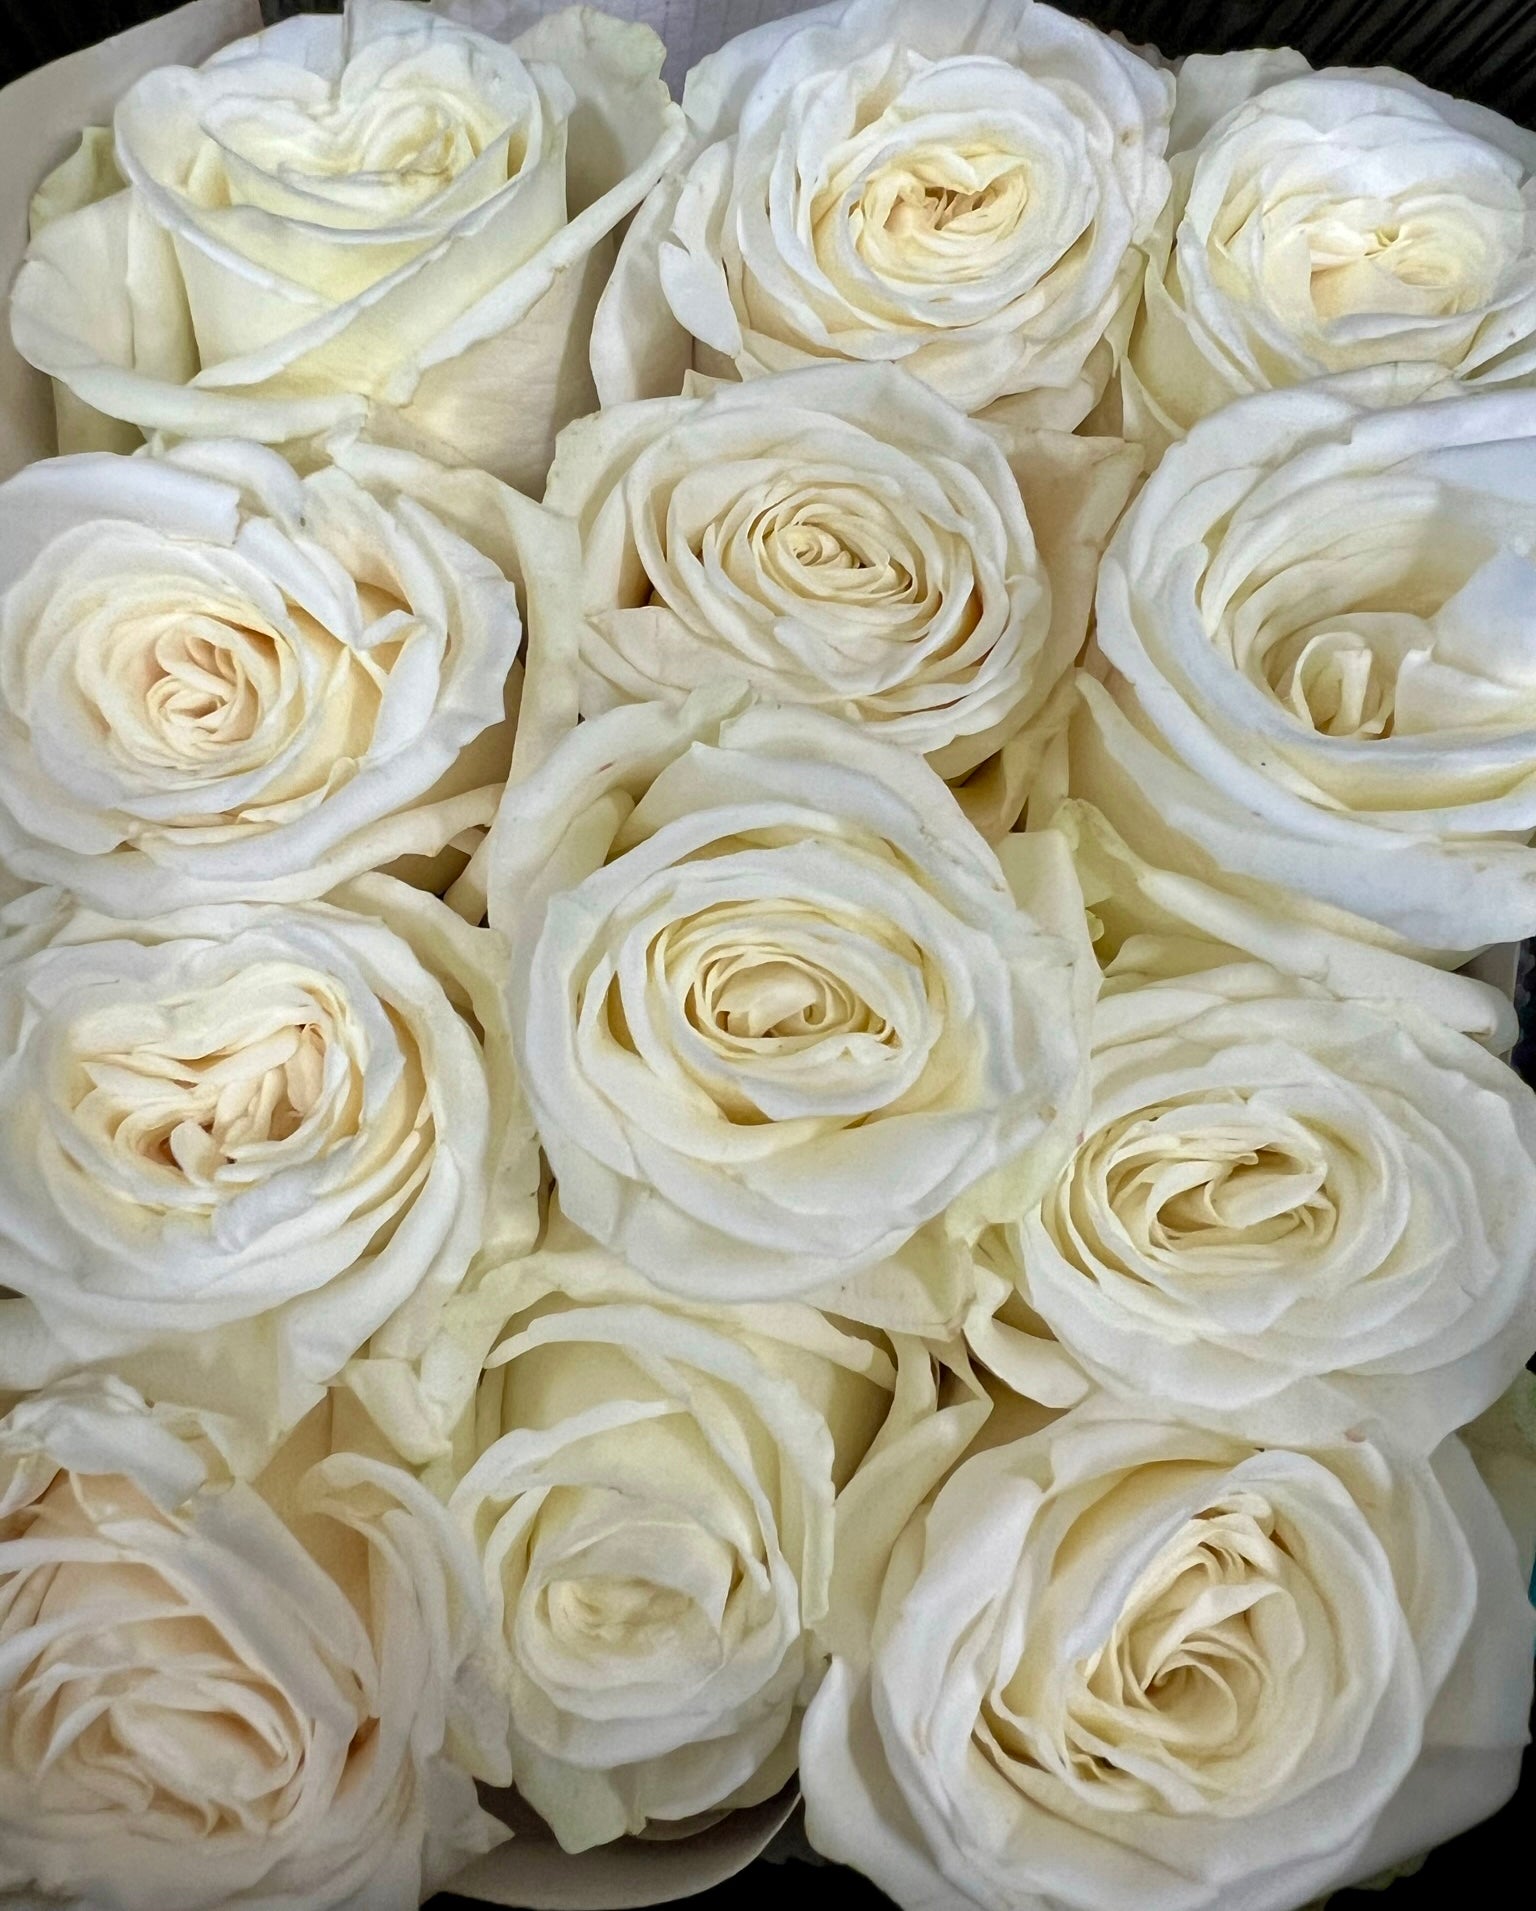 White roses in a box as part of the Love Story product